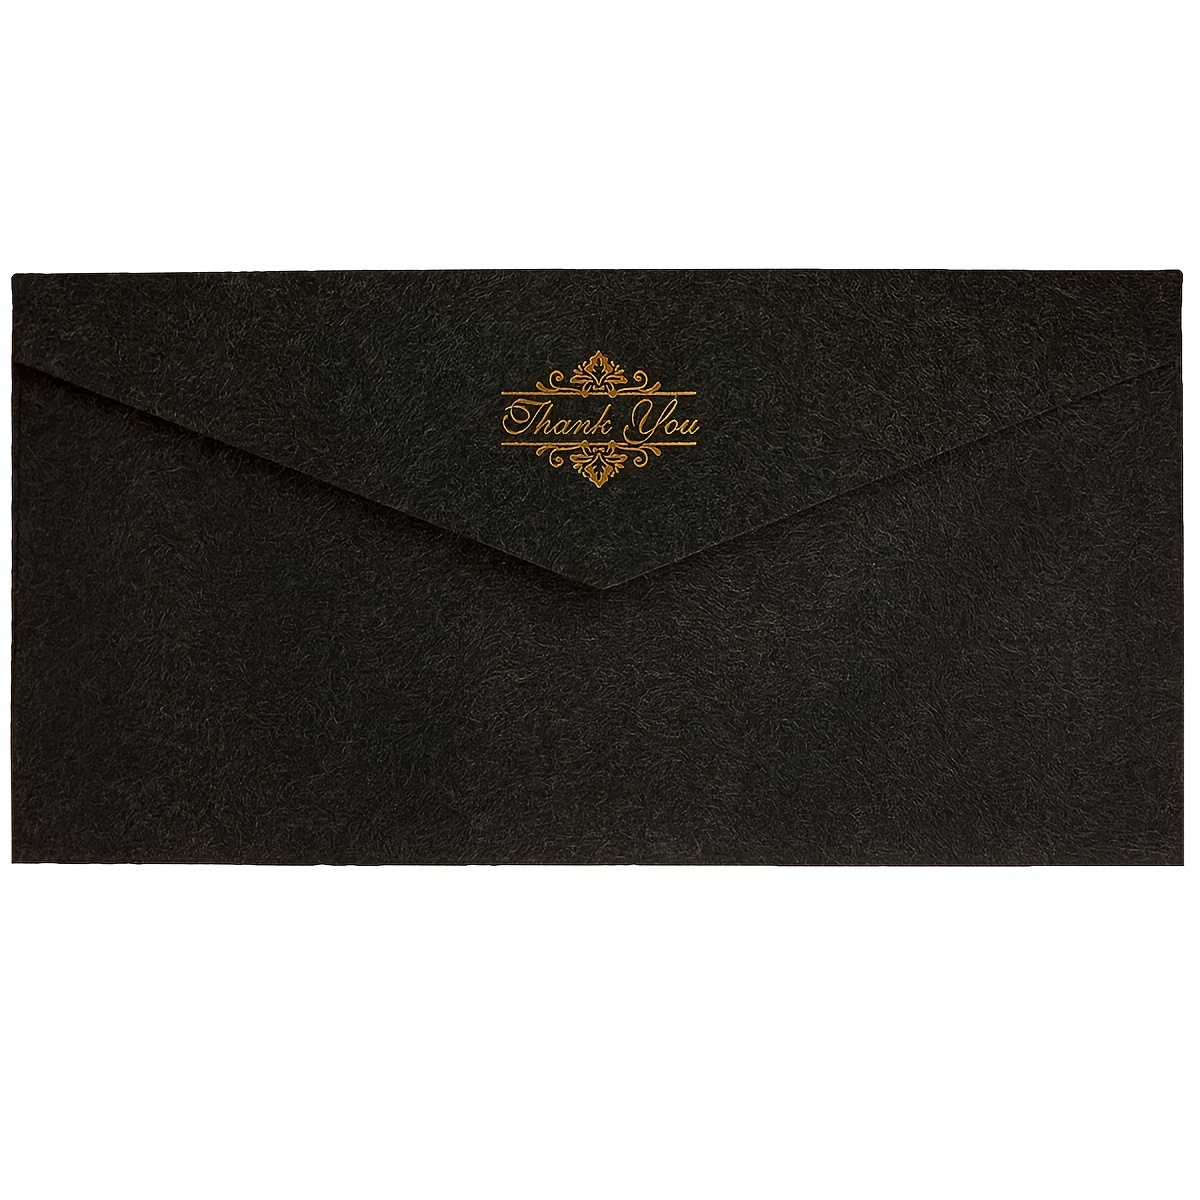 Louis Vuitton Envelopes Greeting Cards & Invitations